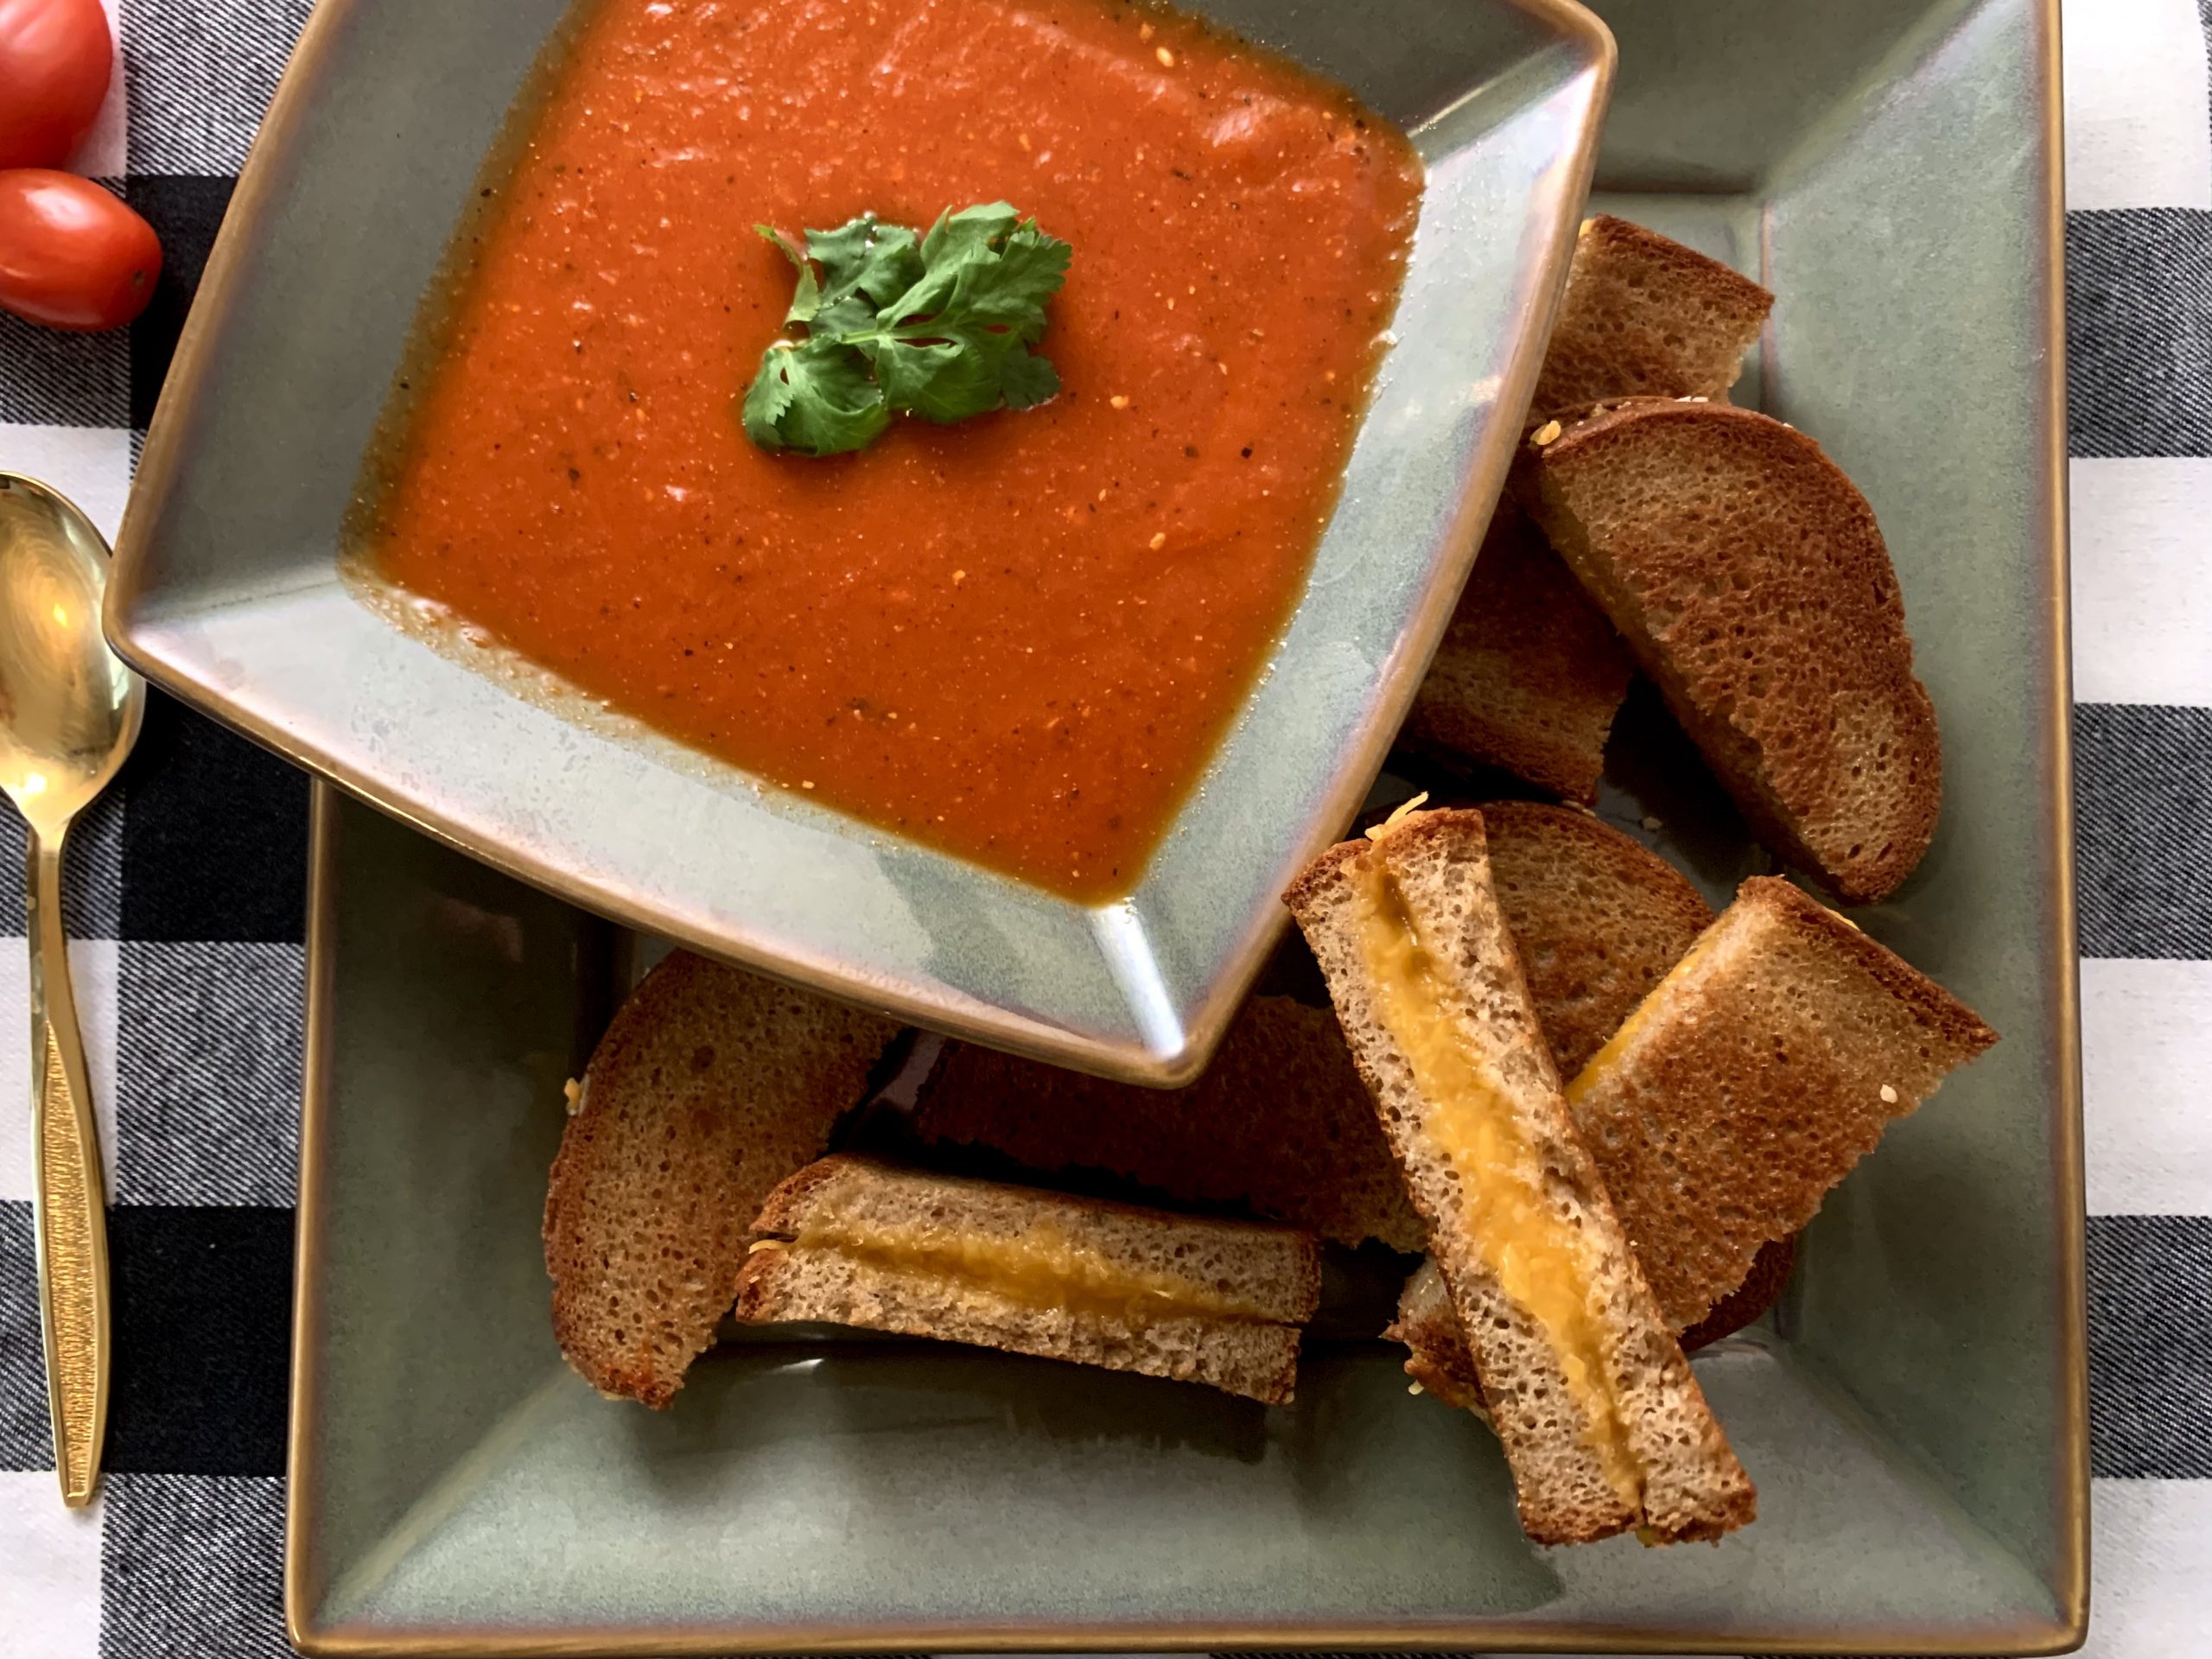 Grilled Cheese Dippers with Tomato Soup